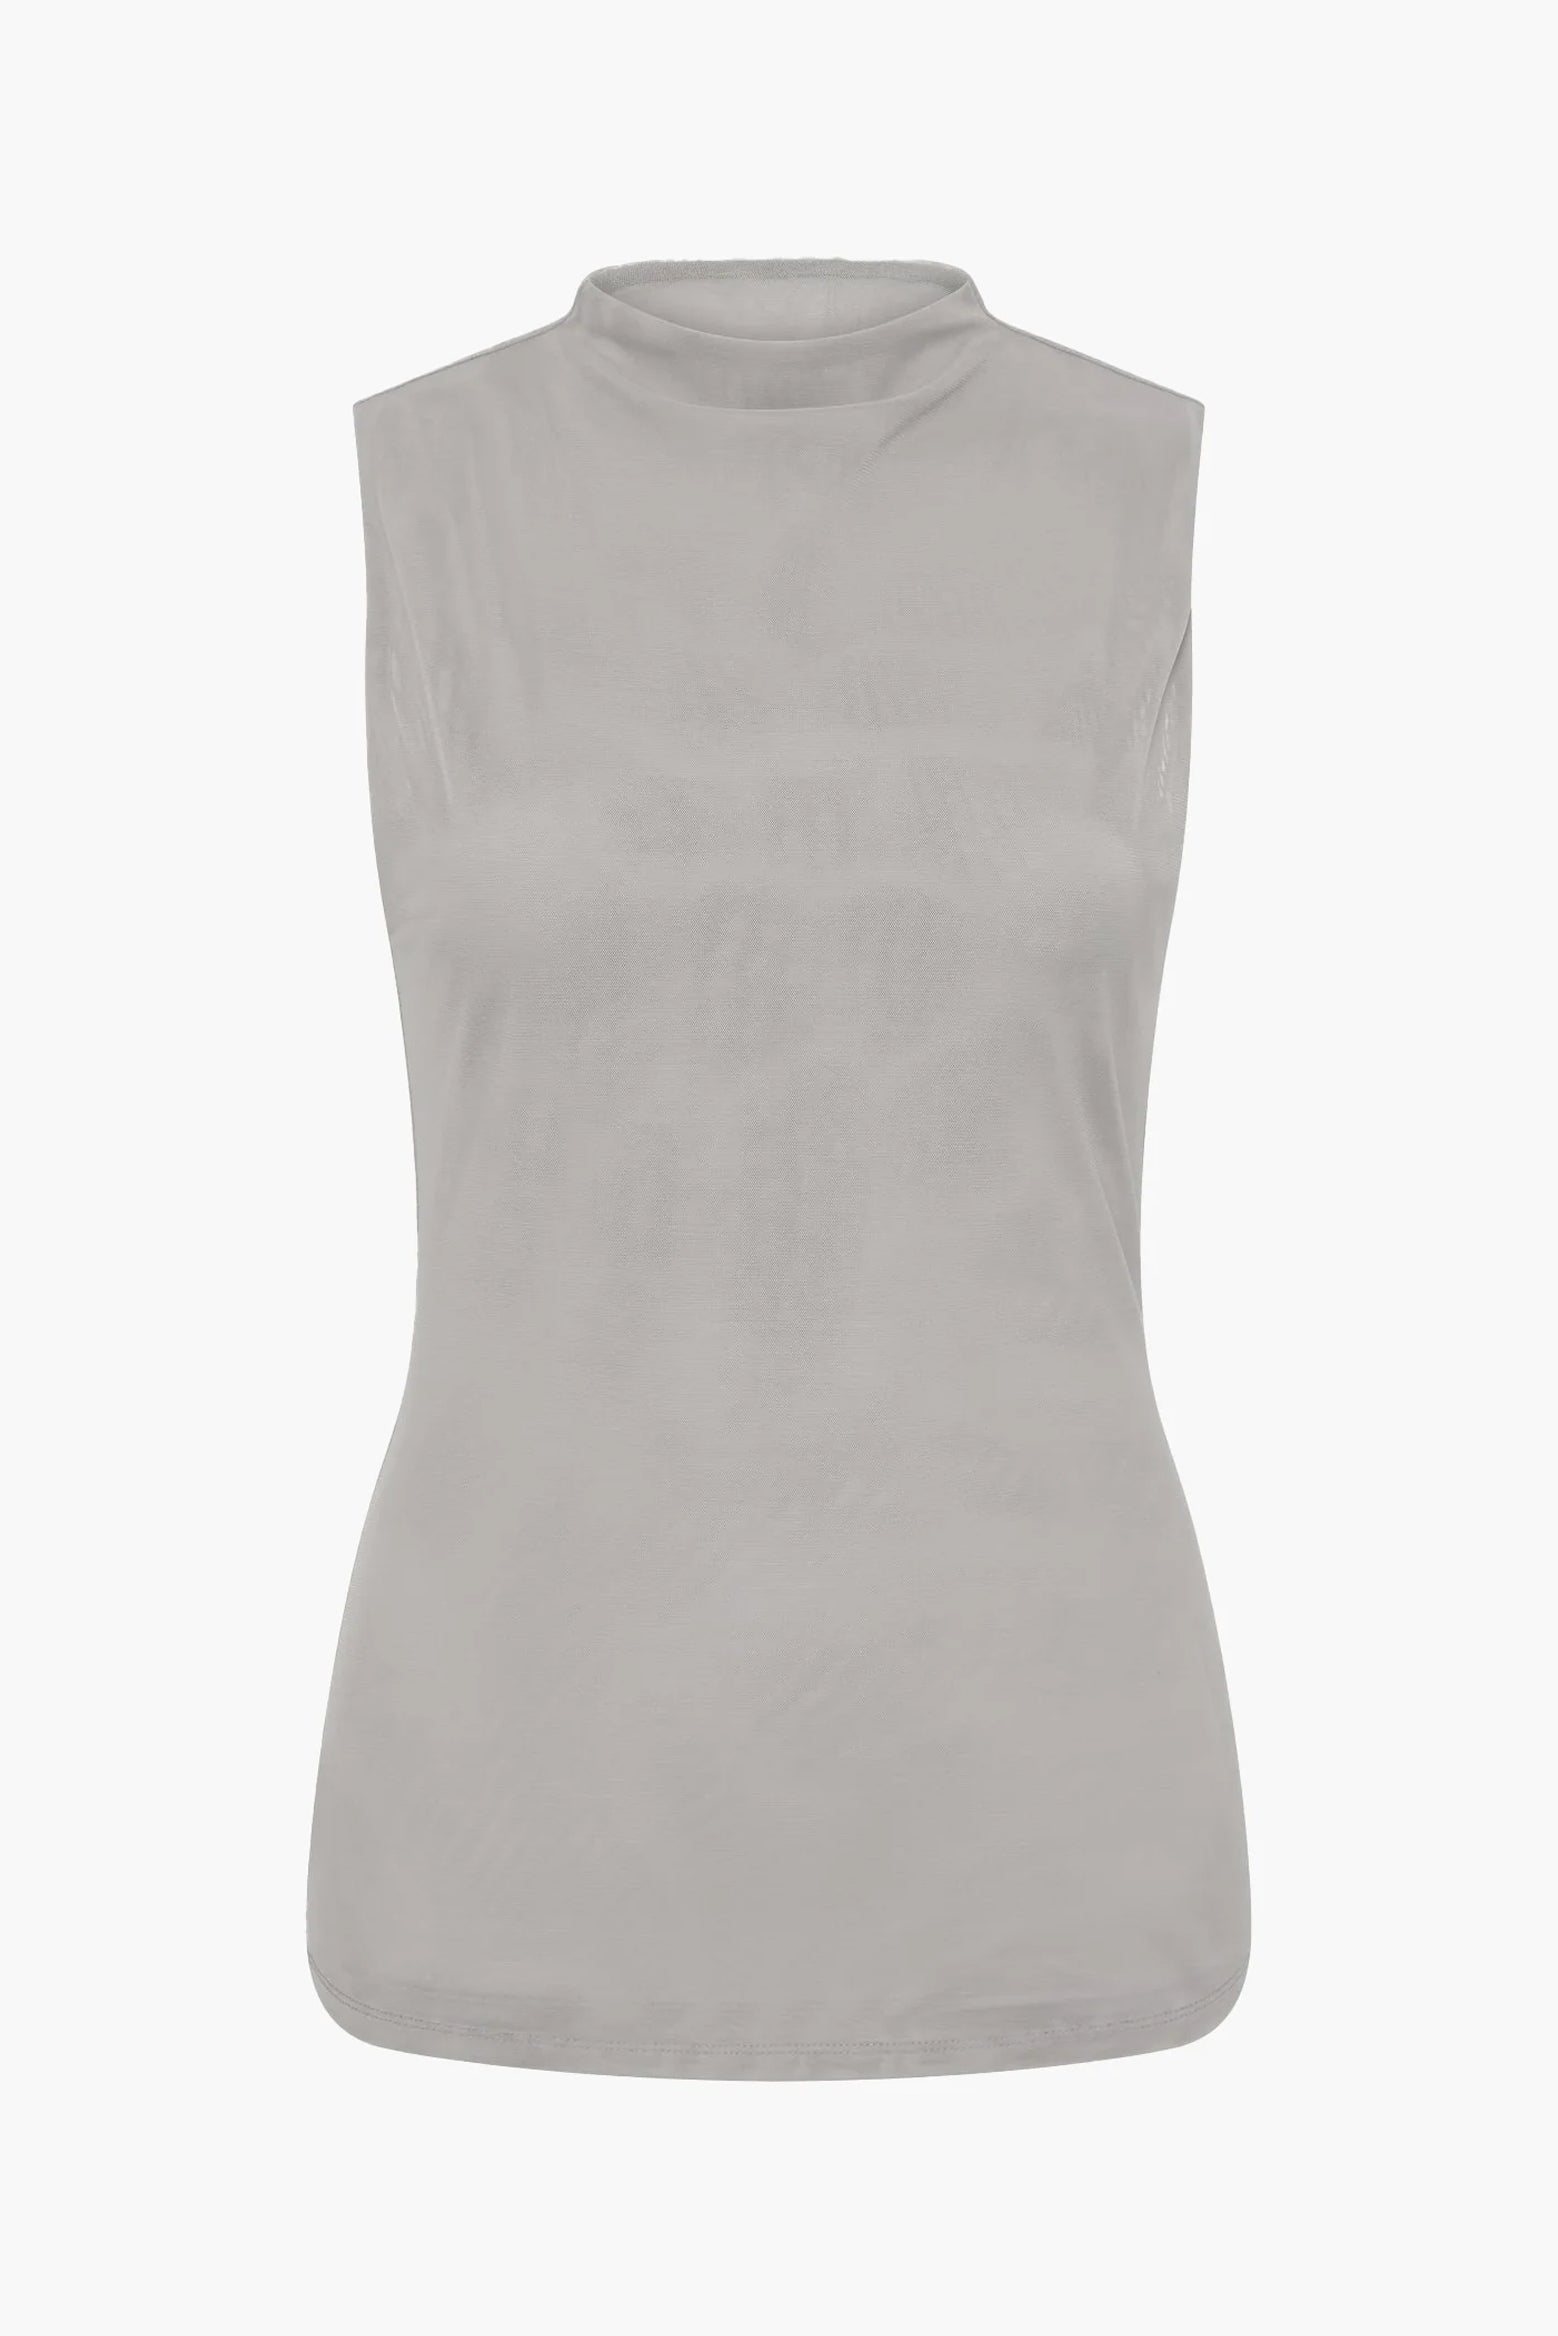 SIR Jacques Mesh Tank in Slate available at The New Trend Australia.